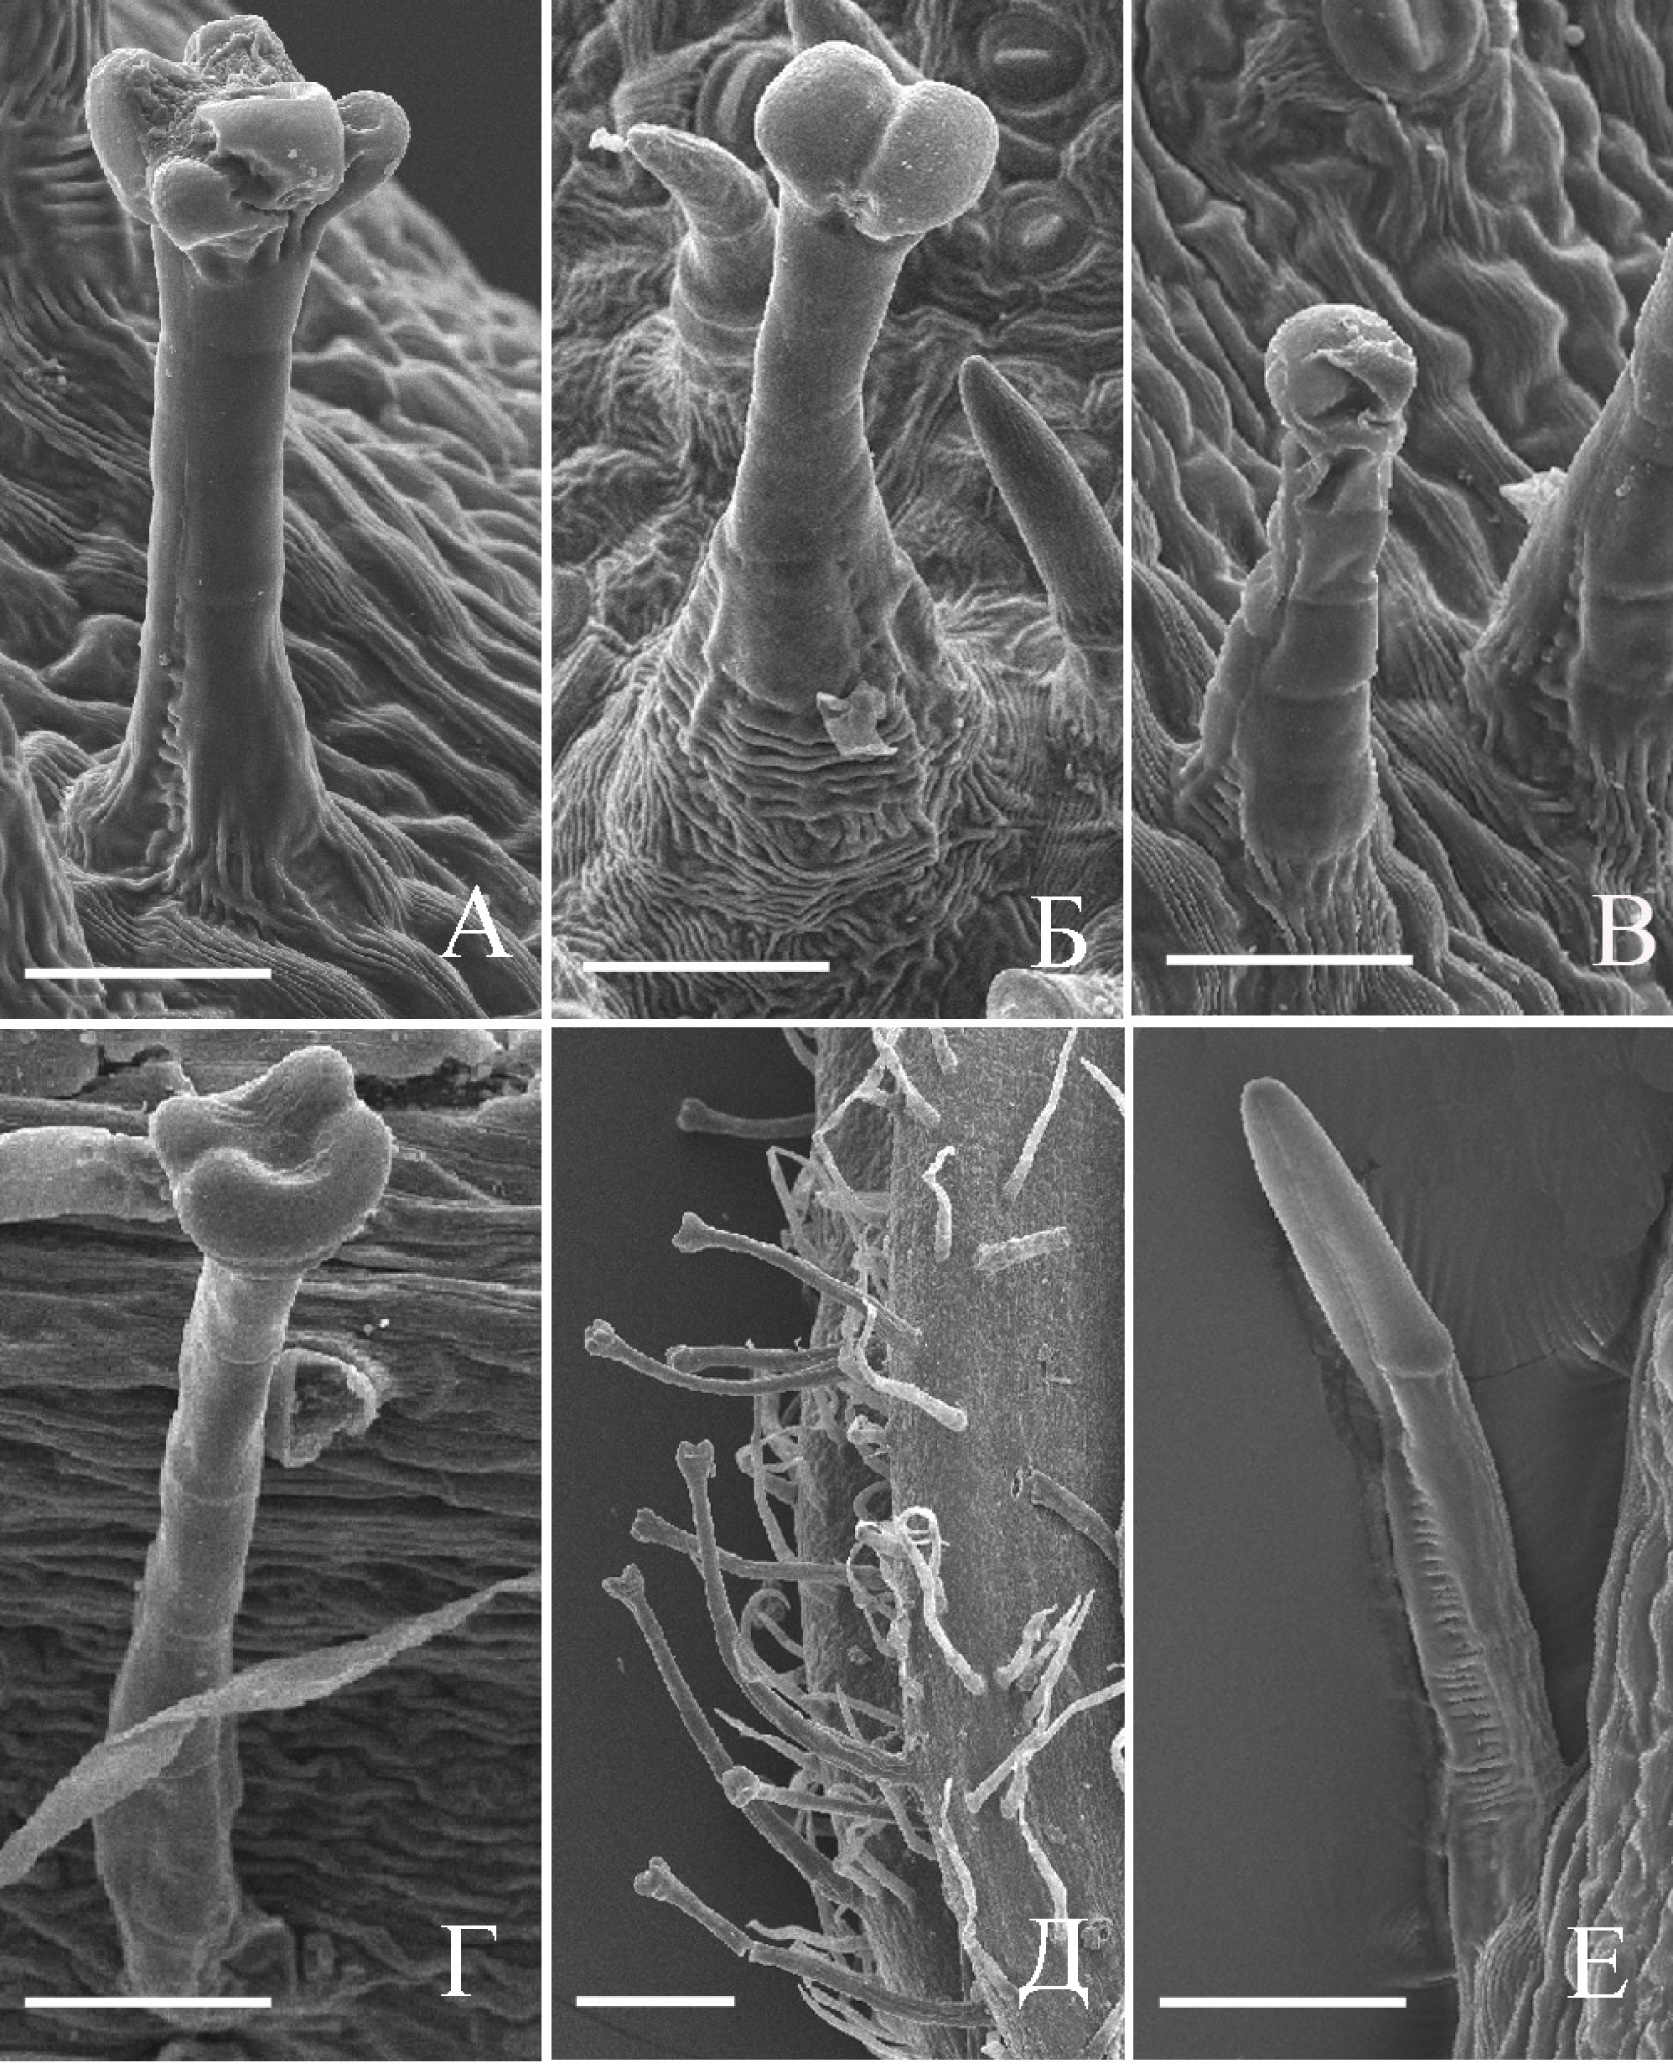 Fig. 1. Morphological types of the glandular and non-glandular trichomes in Doronicum orientale (А-В, Е) and D. macrophyllum (Г, Д): А – 1st-type trichome; Б – 2nd-type trichome; В – 3rd-type trichome; Г – 2-celled trichome; Д – common view of the phyllary edge; Е – a simple non-glandular trichome. Scale bars: А-Г, Е – 50 µm; Д – 200 µm.